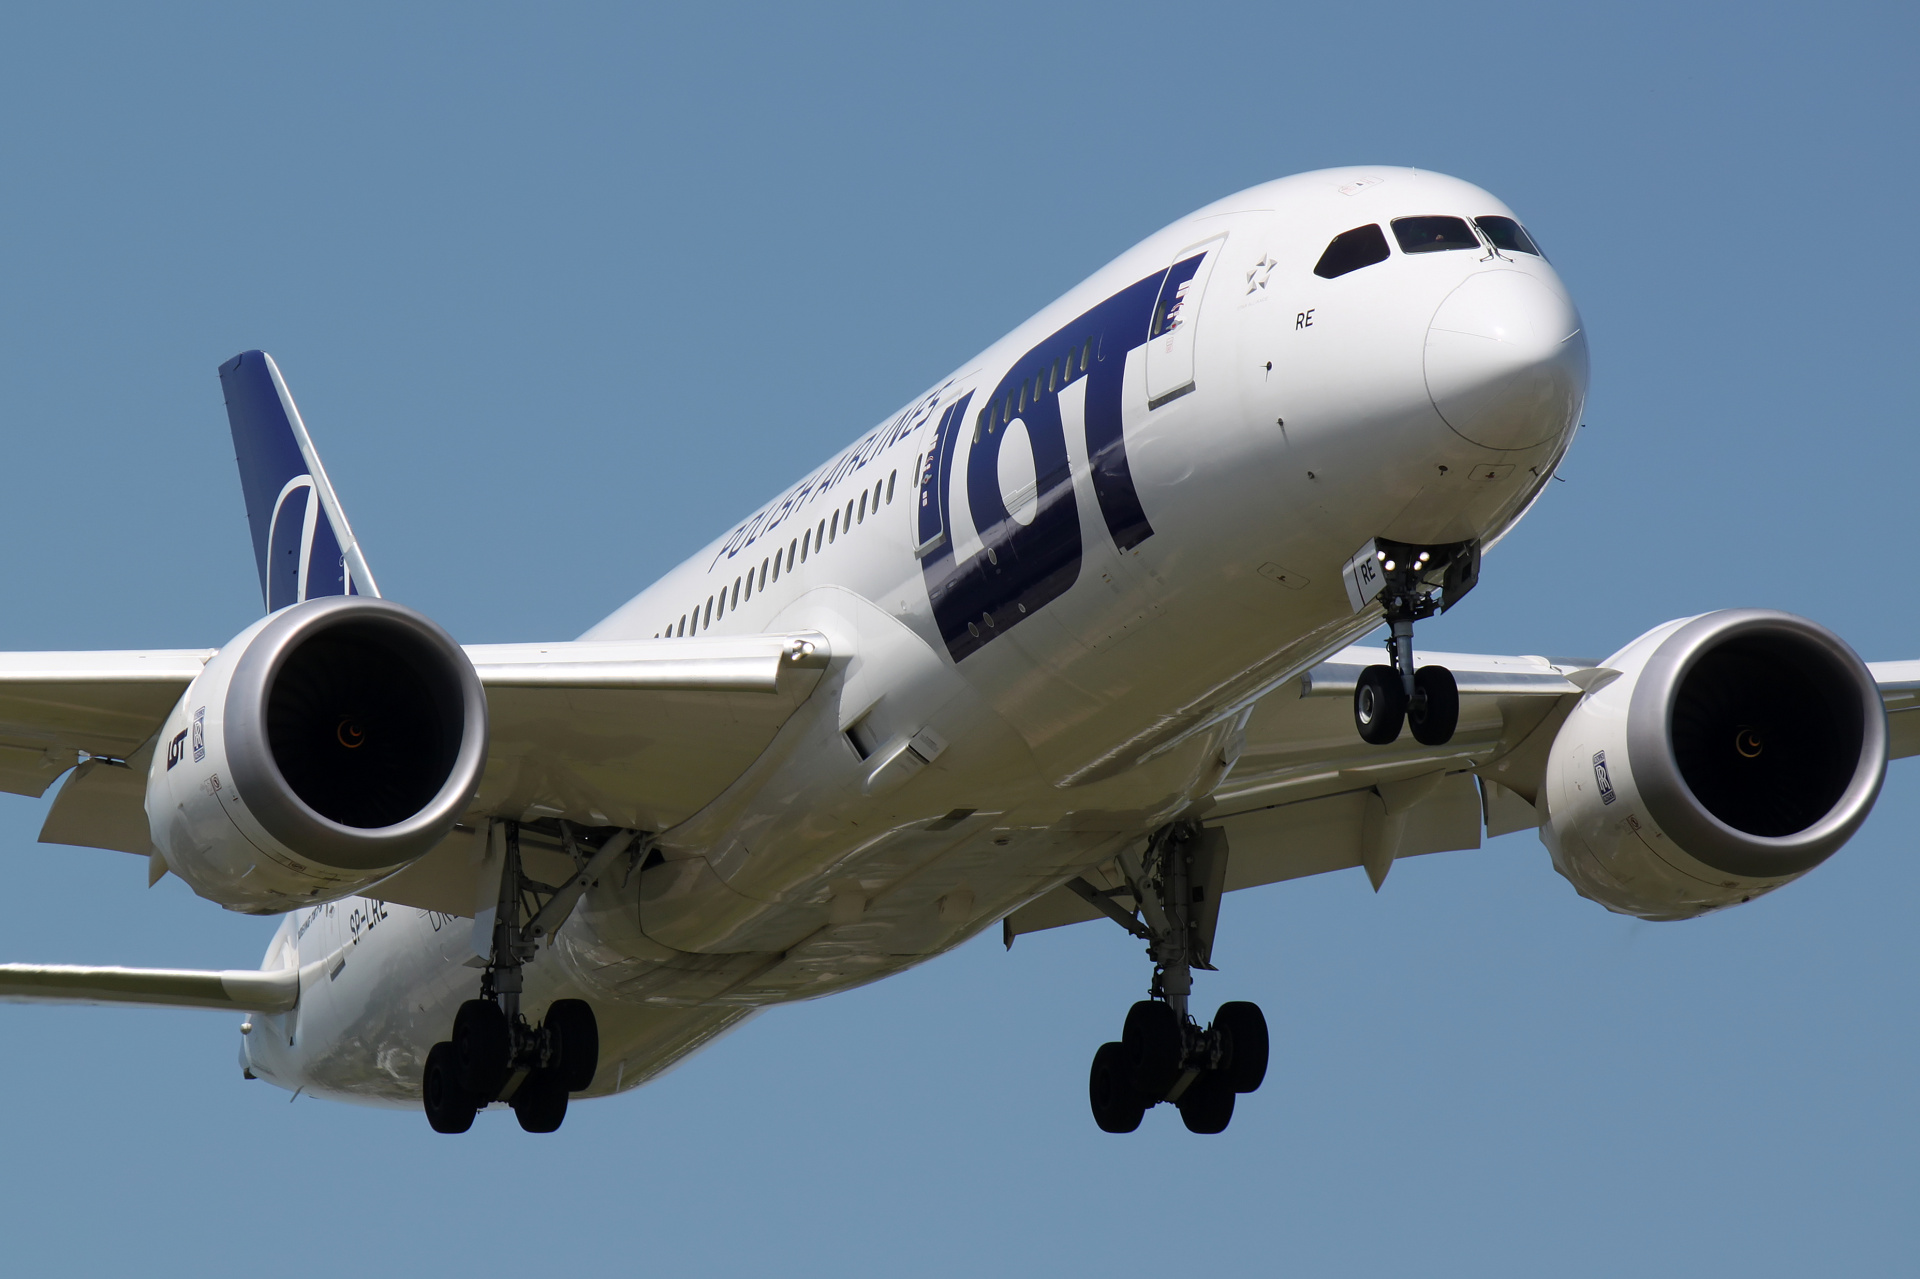 SP-LRE (Aircraft » EPWA Spotting » Boeing 787-8 Dreamliner » LOT Polish Airlines)